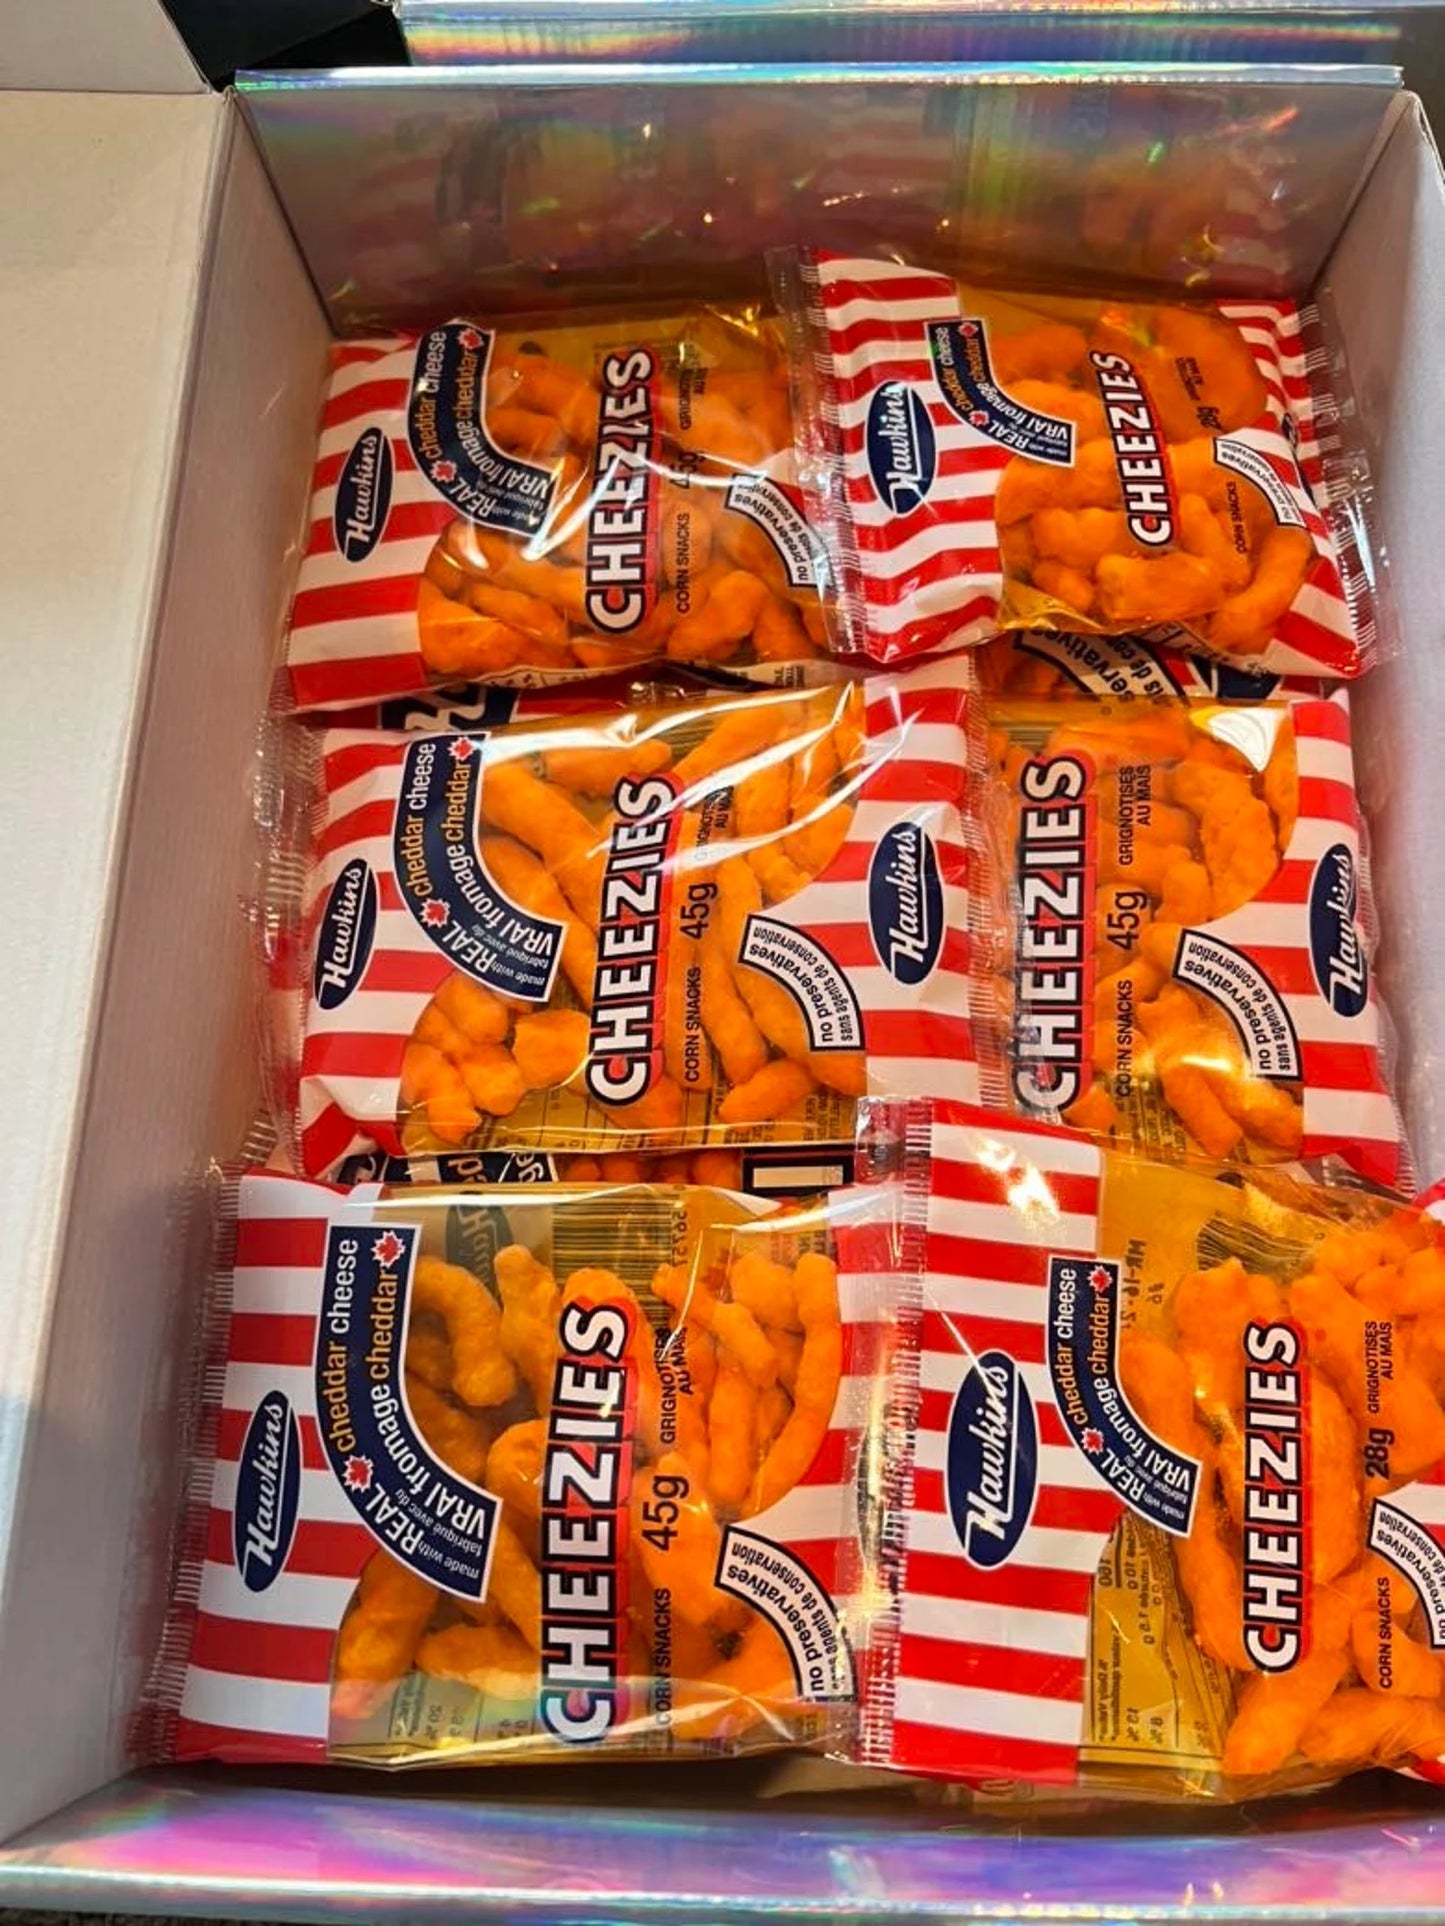 8-PACK Hawkins Cheezies Gift Box Canadian Chips